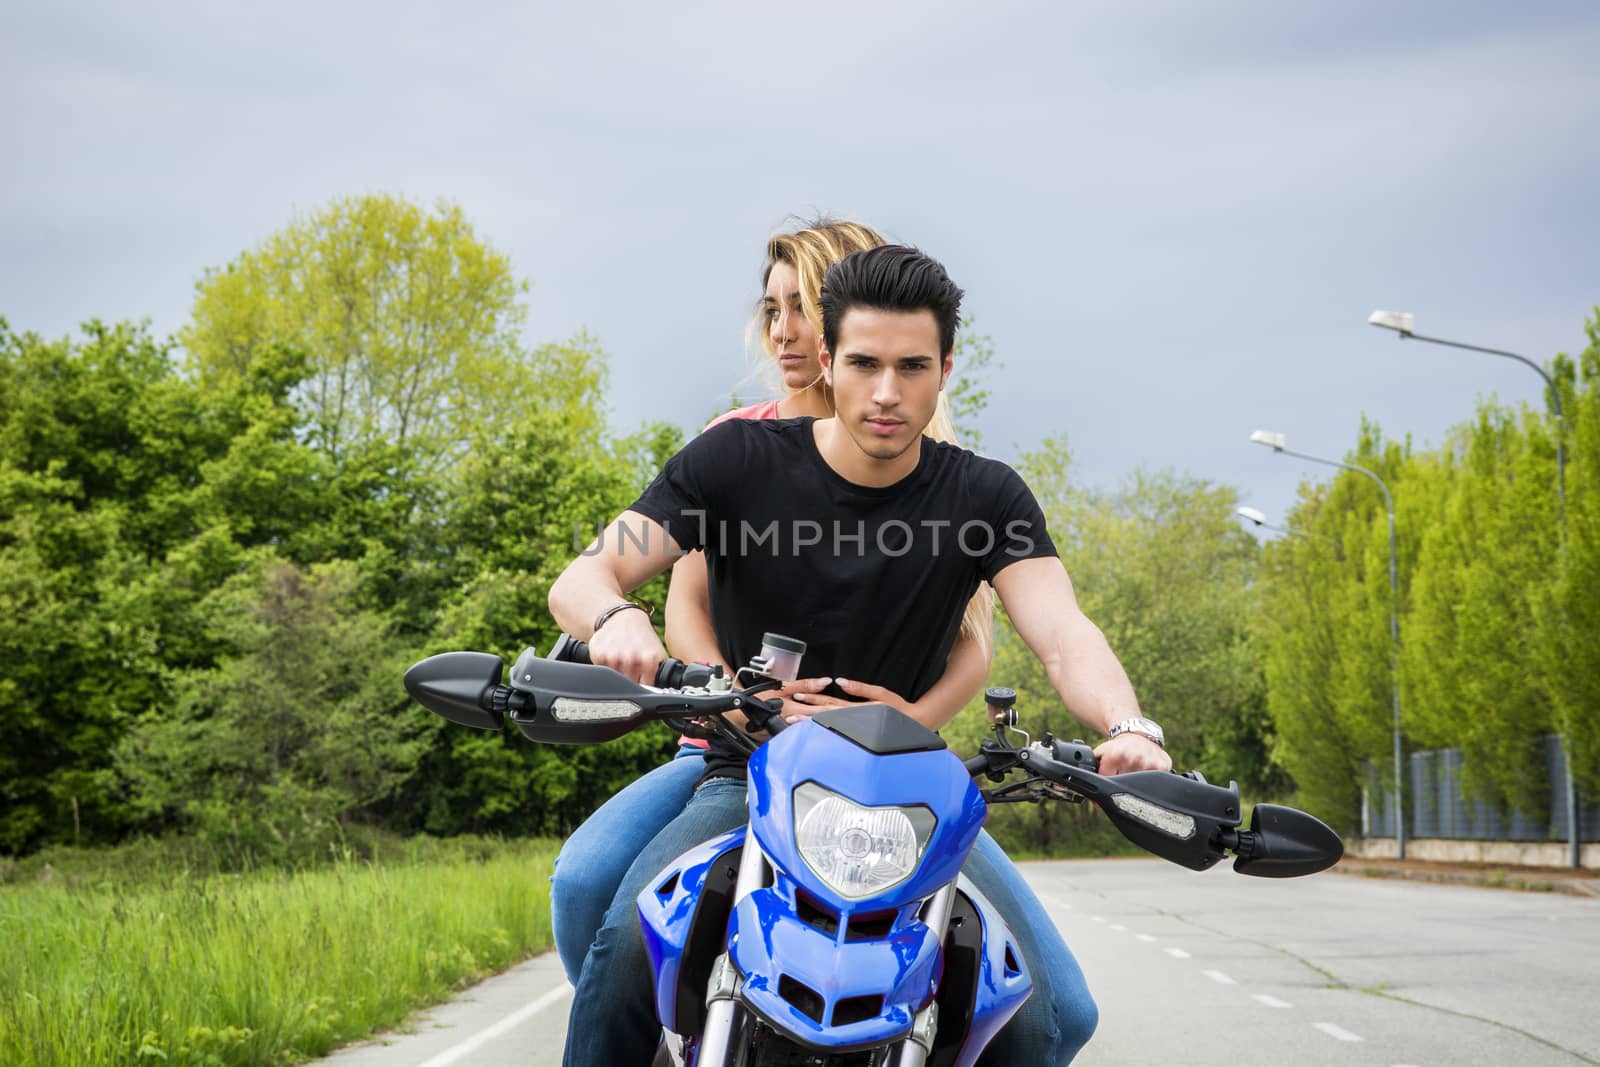 Handsome young man riding motorcycle with woman as passenger